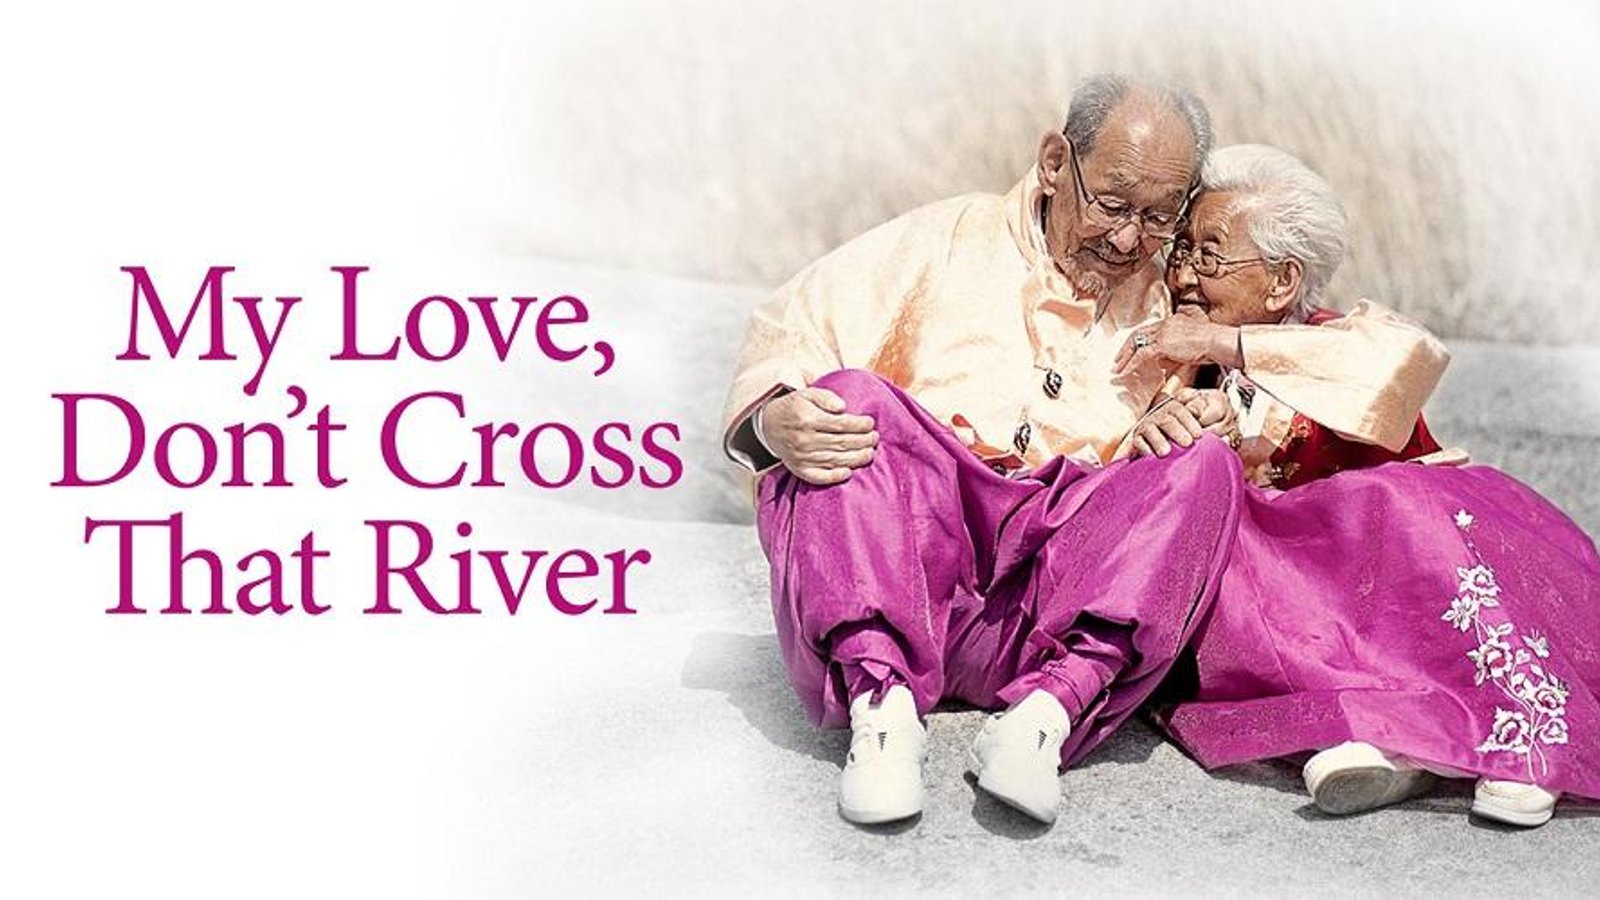 My Love, Don't Cross that River - An Elderly Couple Share their Final Moments